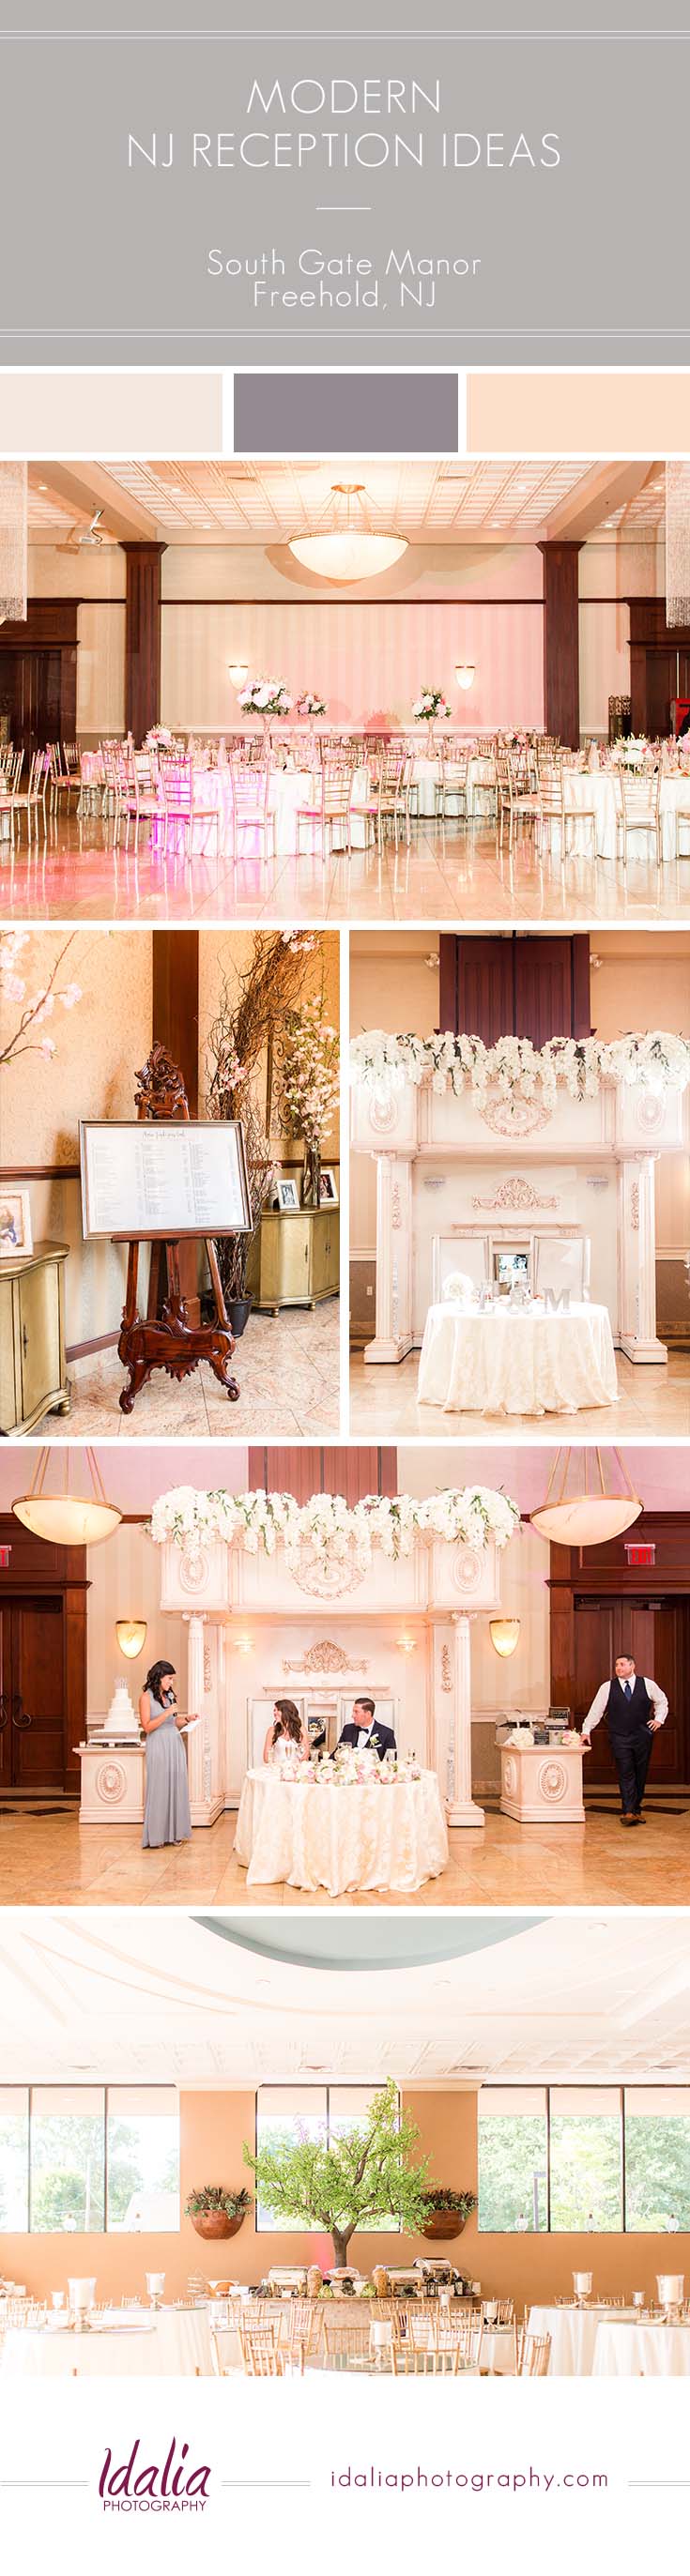 Modern NJ Wedding Reception at South Gate Manor in Freehold, NJ